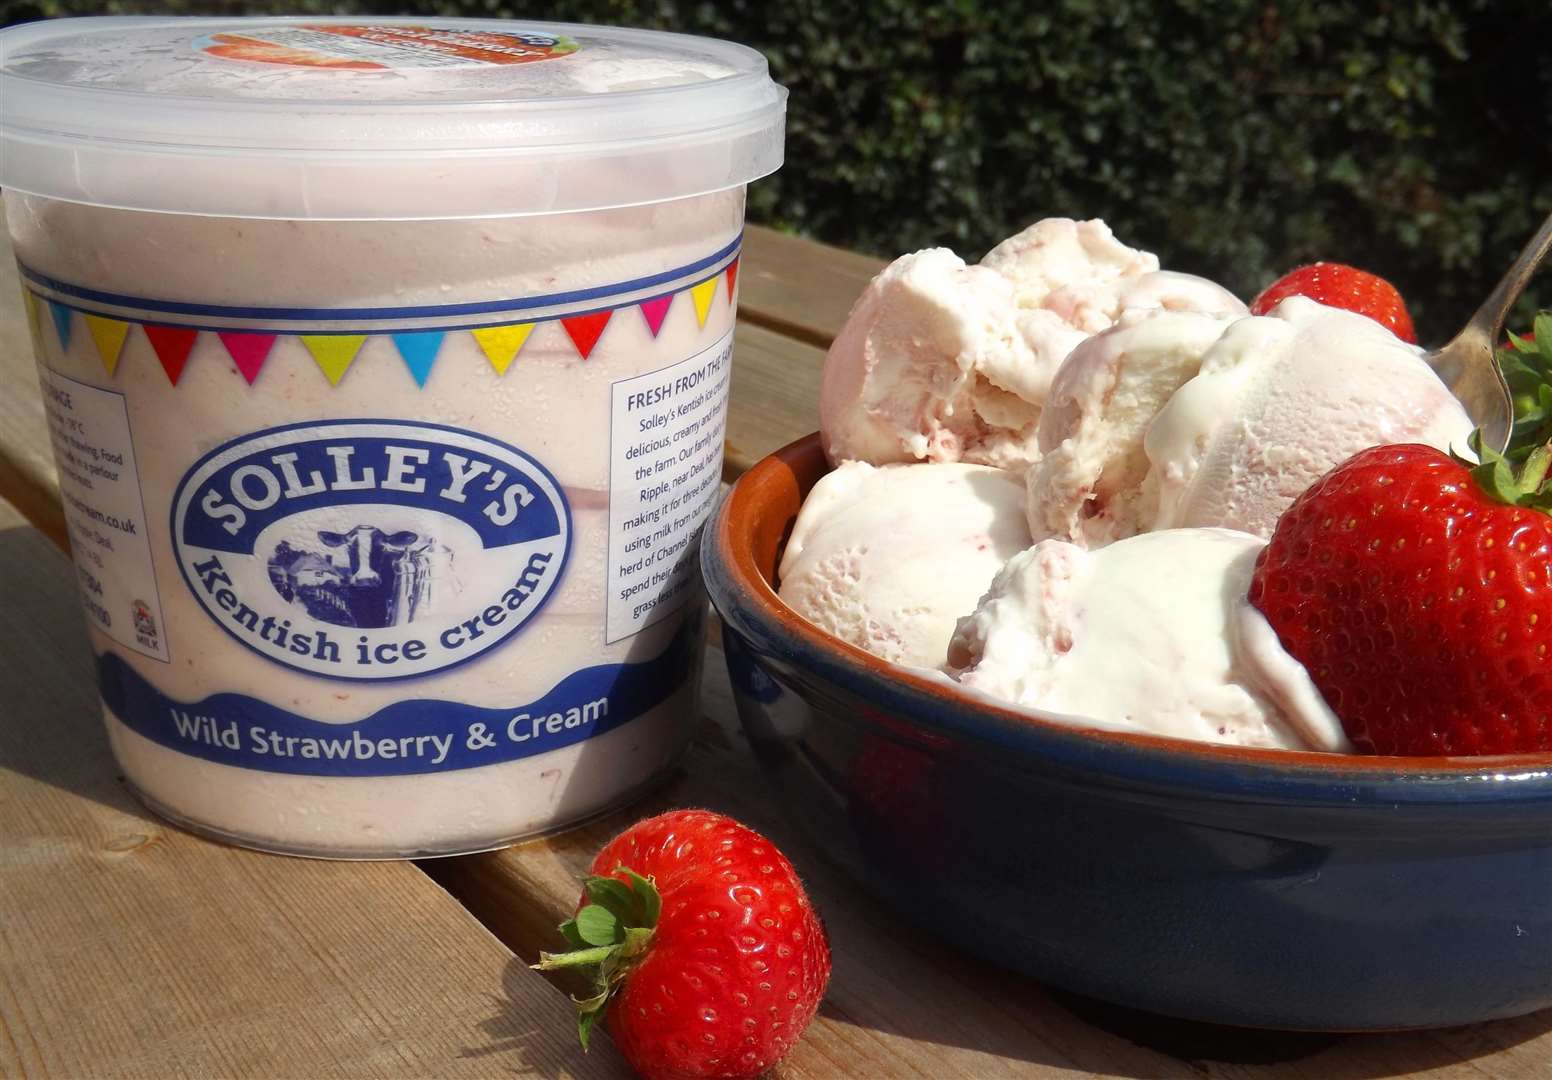 Solley's Ice Cream is a finalist in the Taste of Kent Awards 2019 Kent Countryside Award